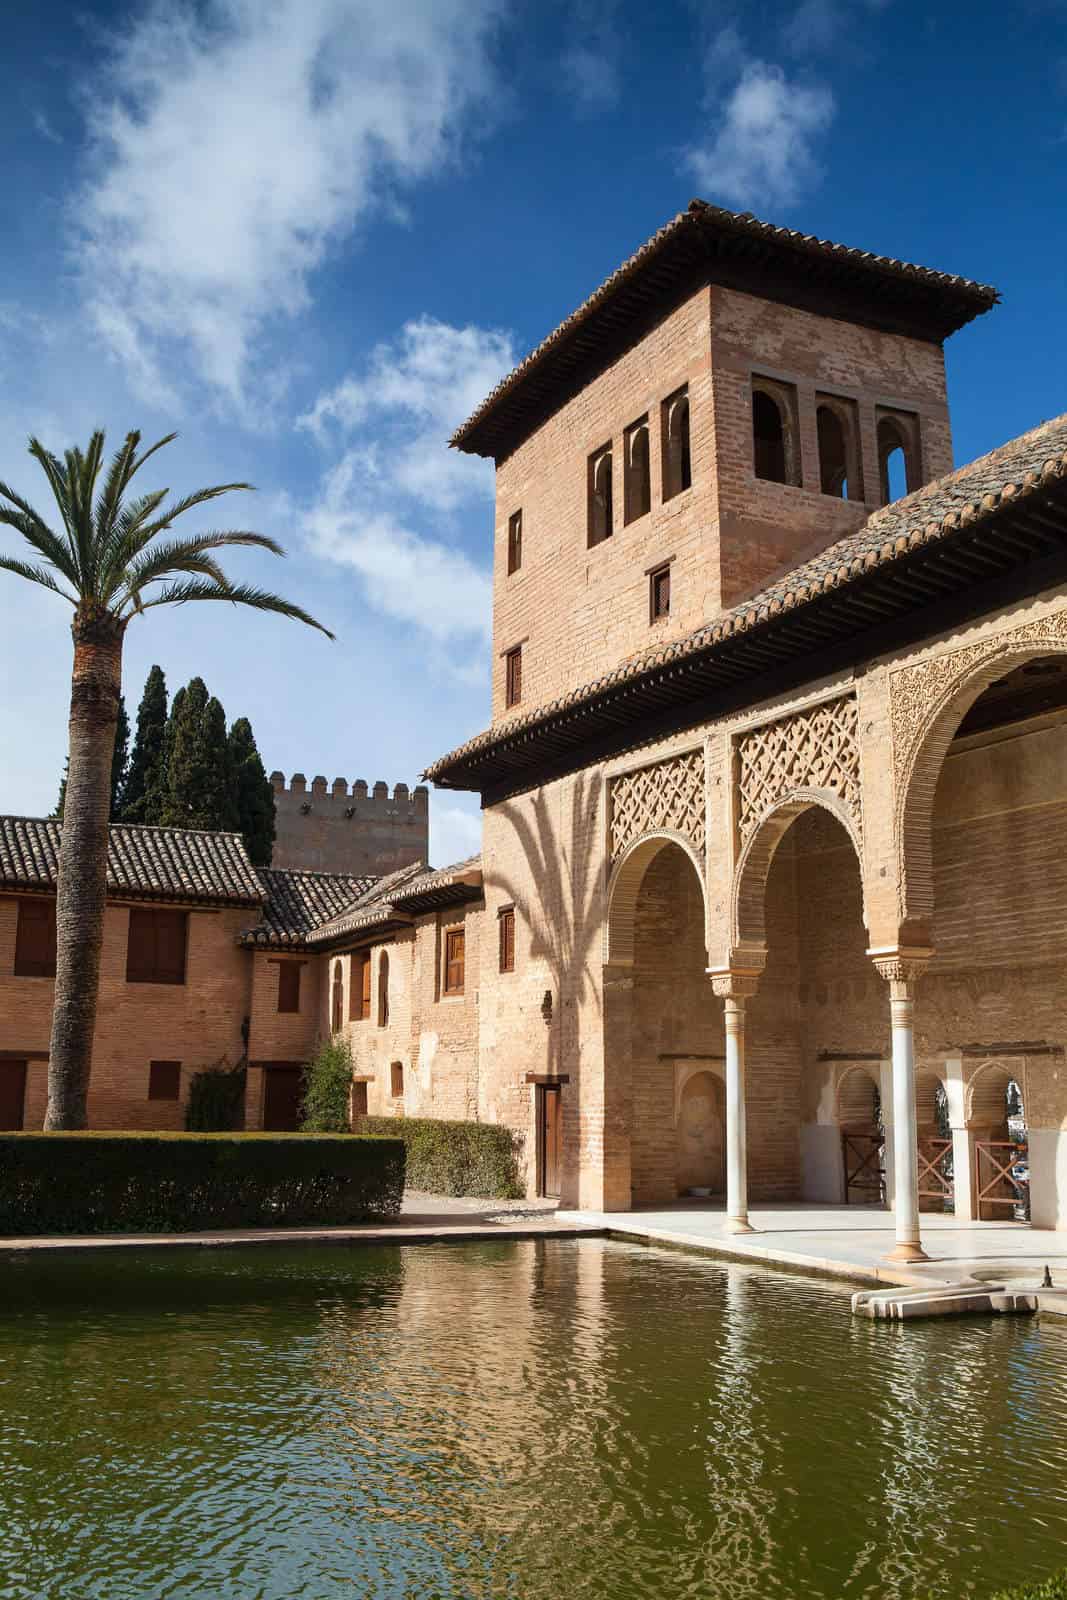 Ladies Tower (Torre de las Damas) and Gardens of the Partal at the Alhambra